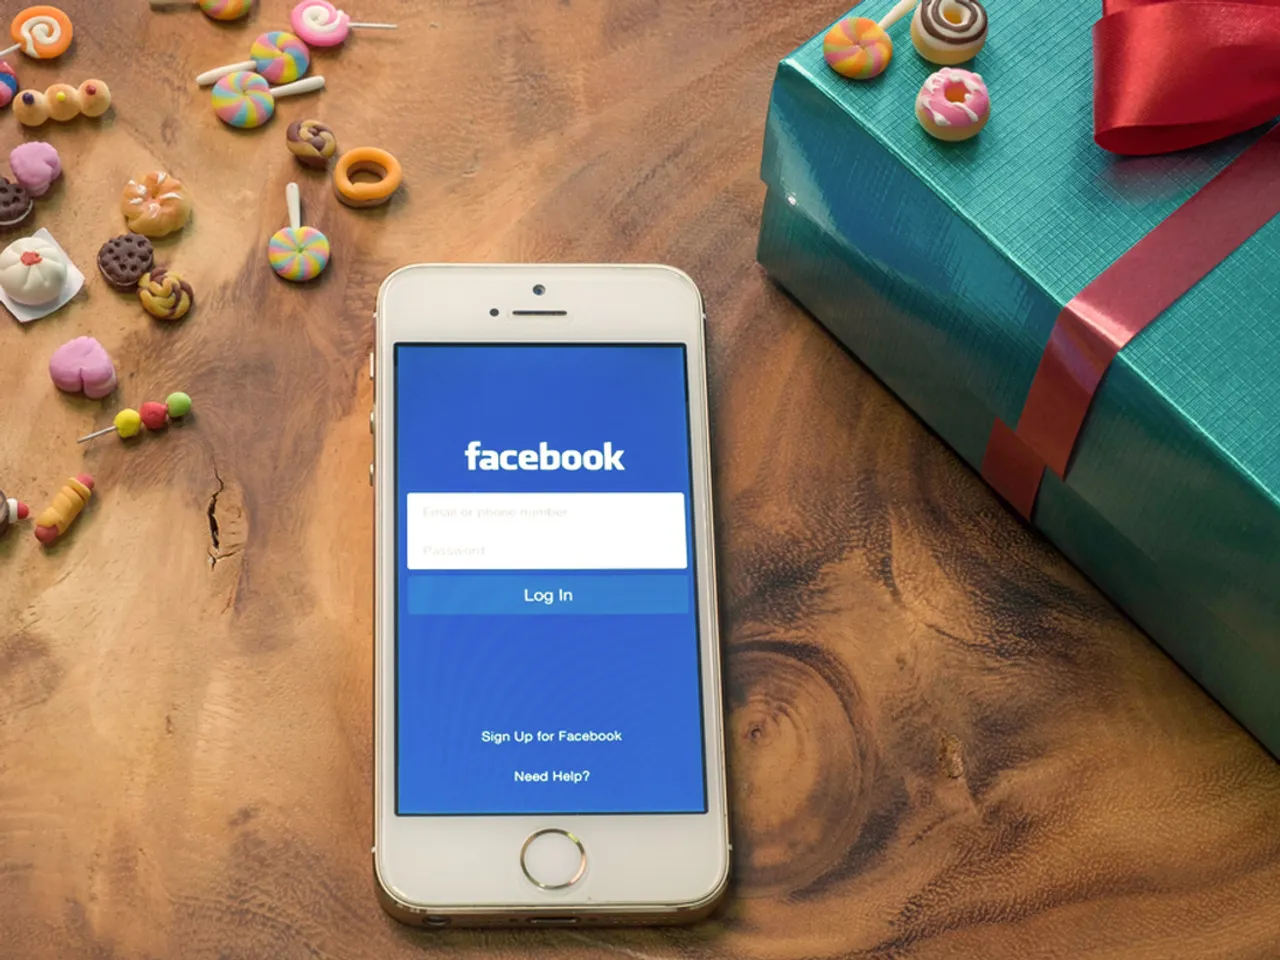 Facebook-mobile commerce game